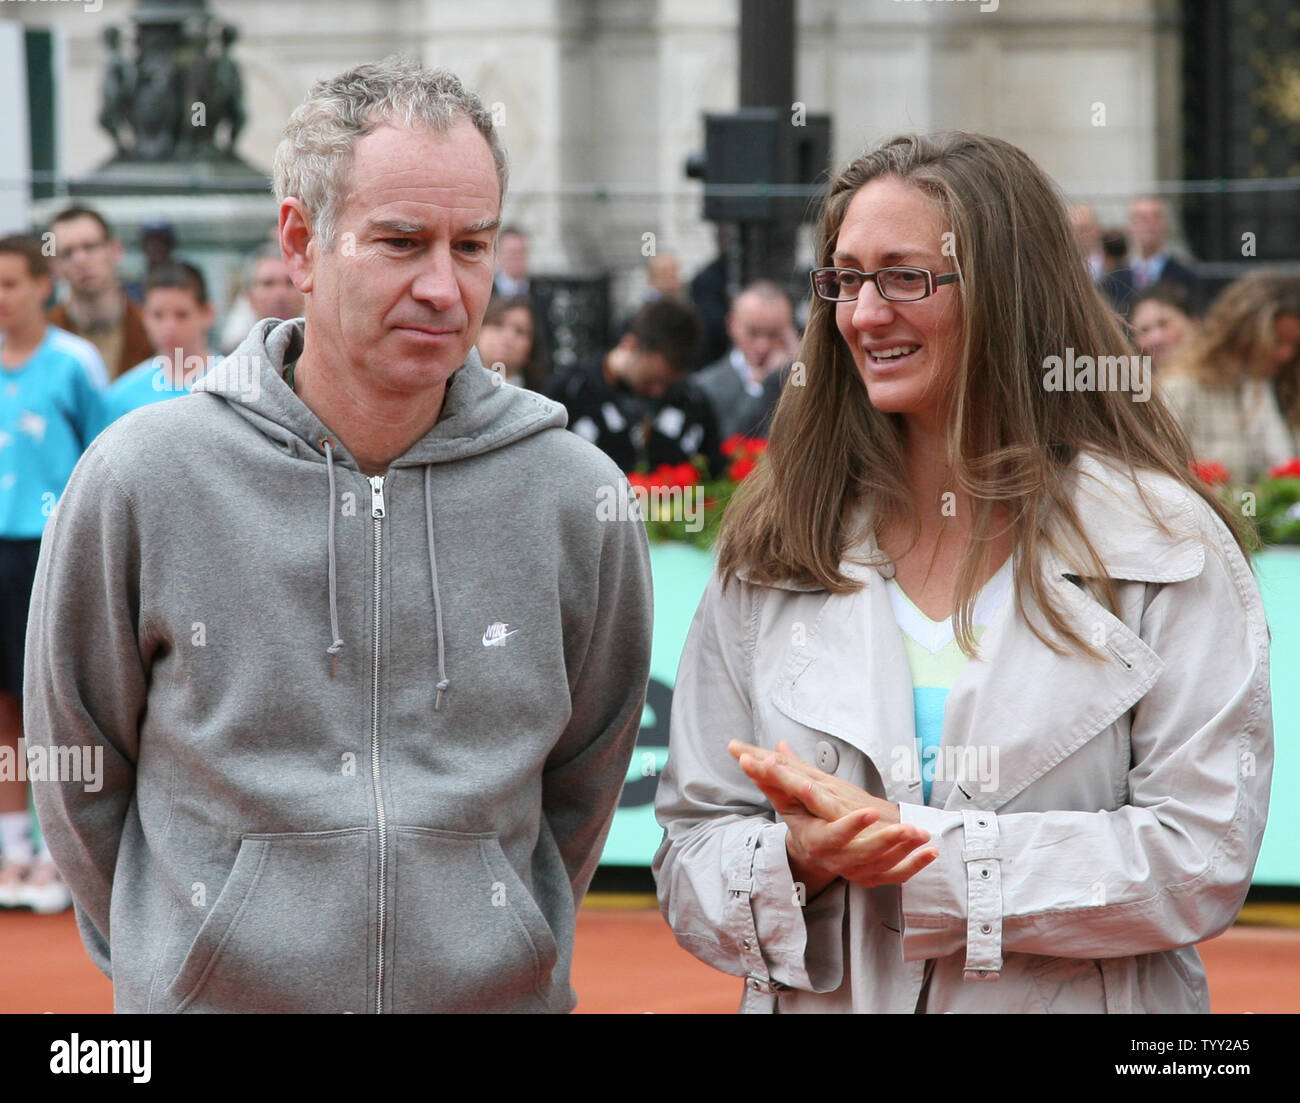 Tennis greats John McEnroe and Mary Pierce arrive on a clay court set up in front of the Hotel de Ville (city hall) during the launch of the exhibition 'Roland Garros in the City' in Paris on June 4, 2008.  The event coincides with the French Open tennis tournament taking place this week in Paris.   (UPI Photo/ David Silpa) Stock Photo